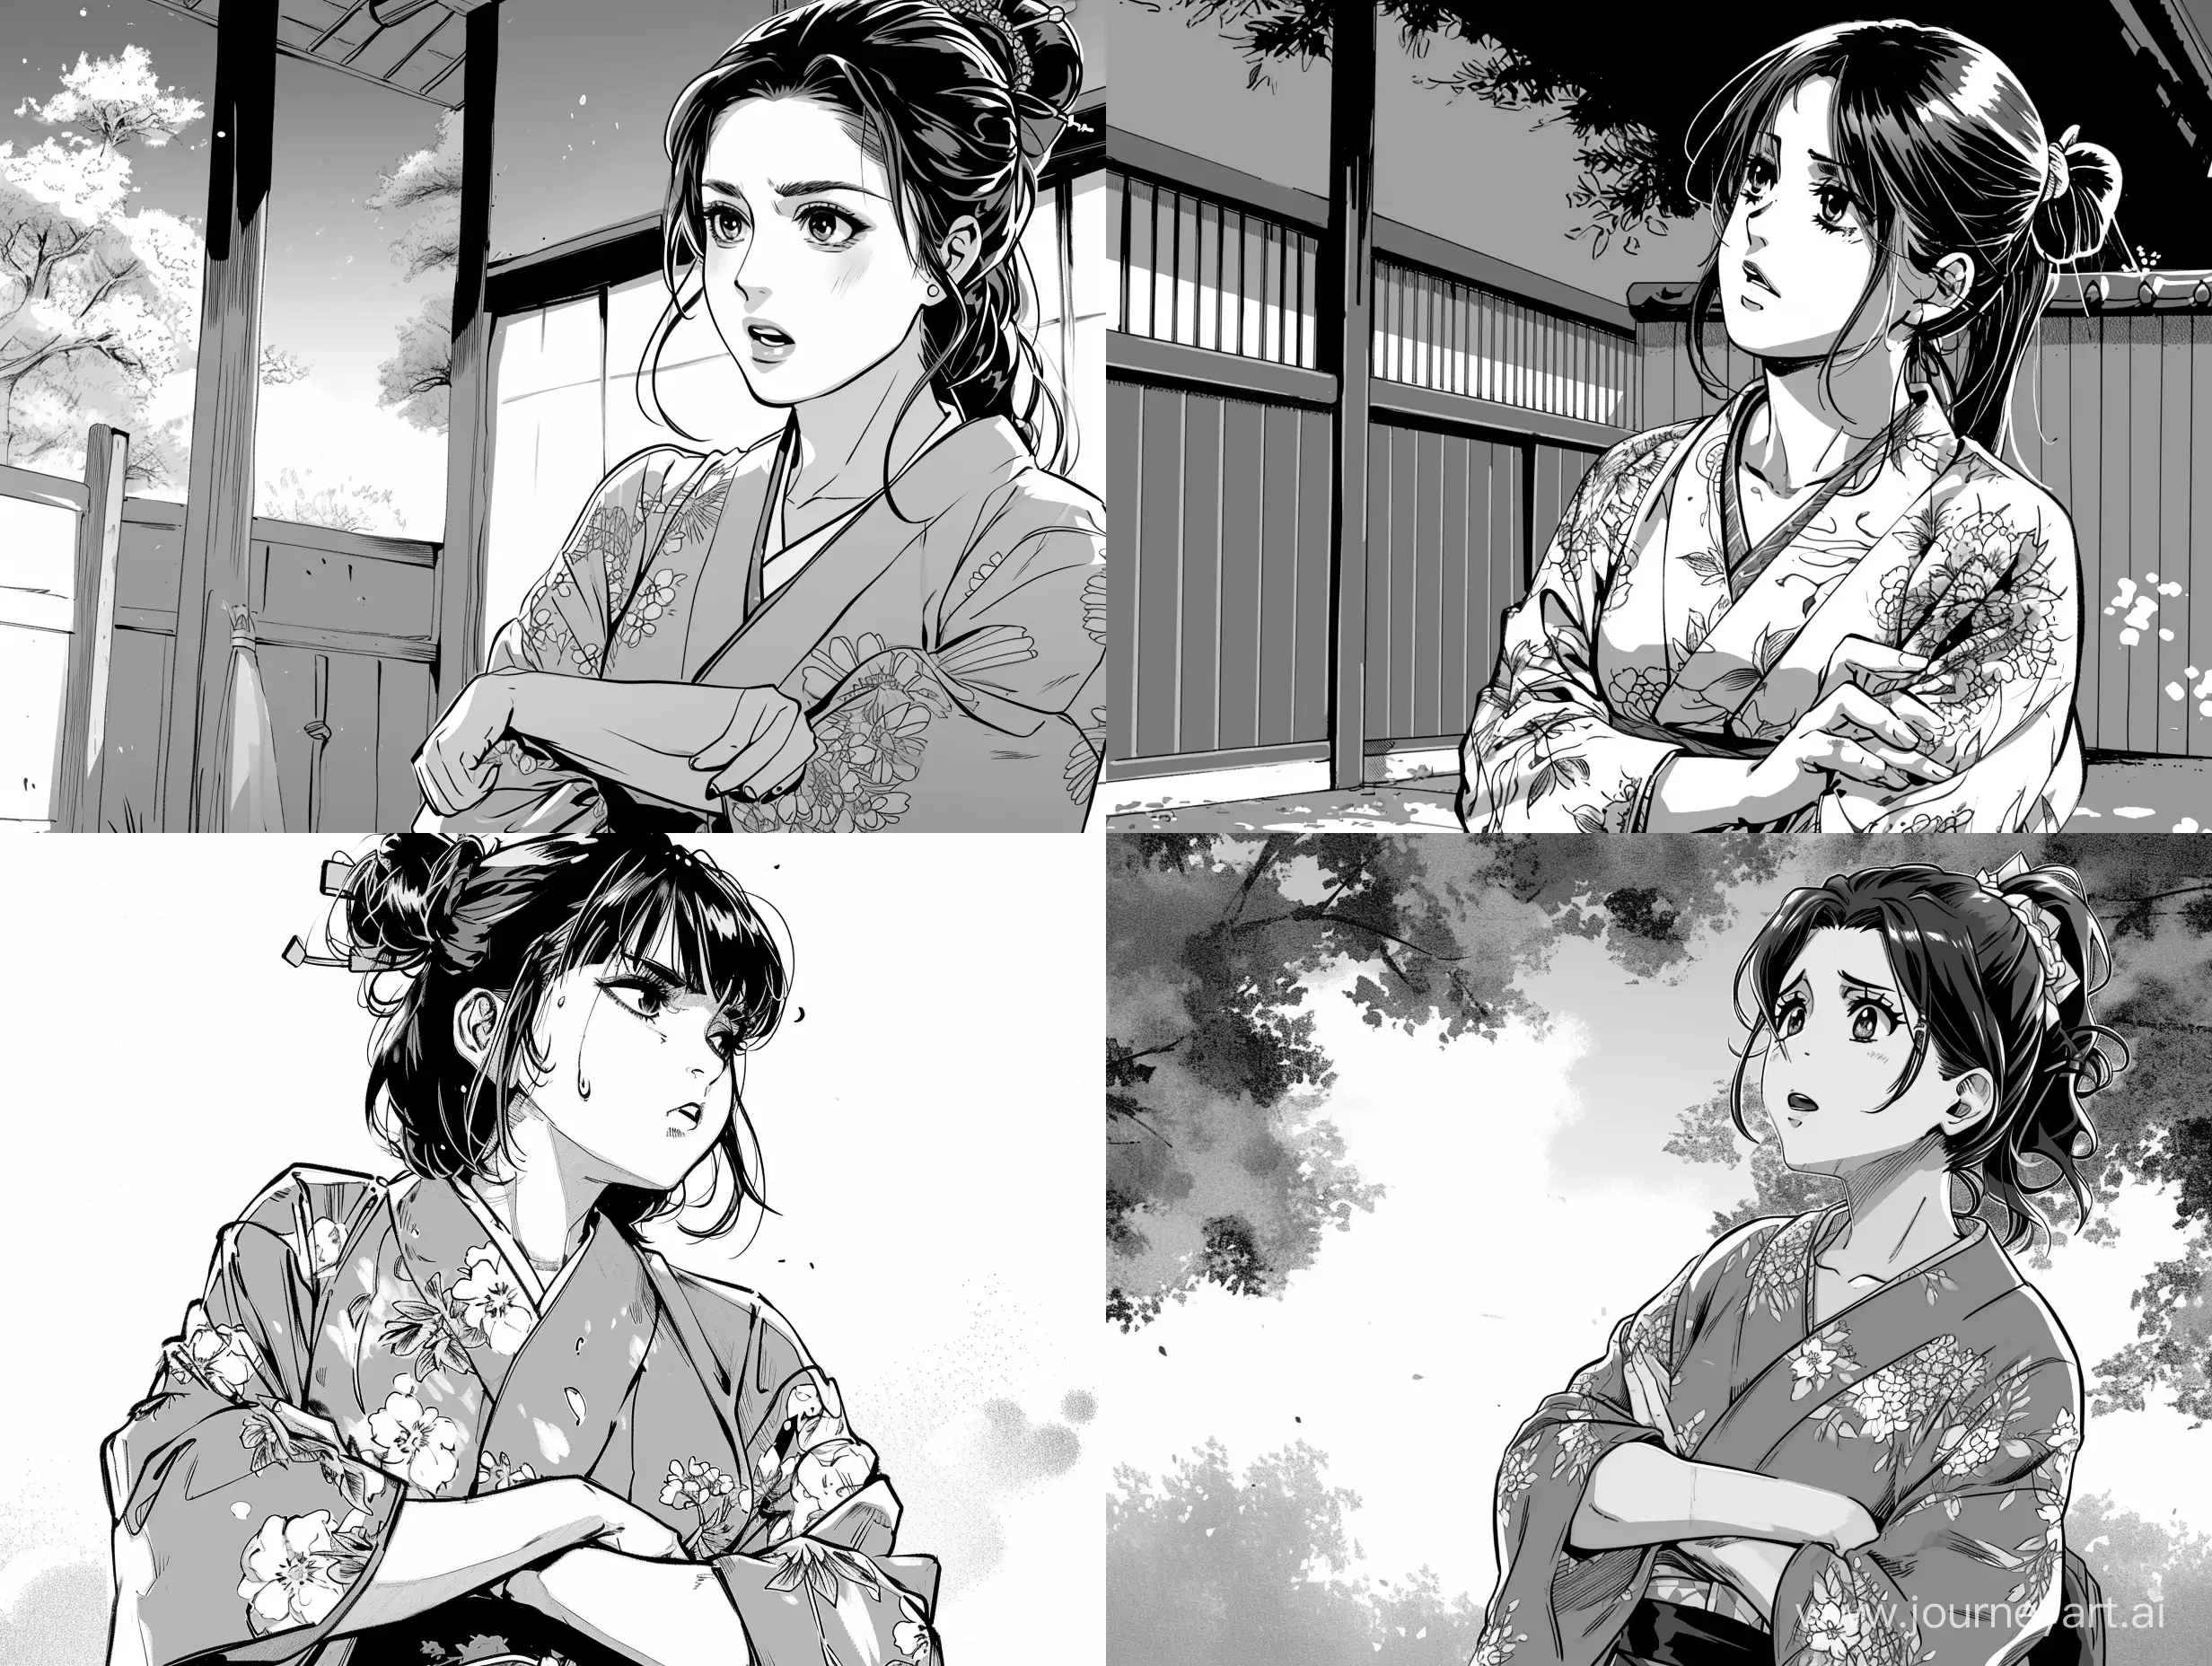 Tsundere-Woman-in-Kimono-Expressing-with-Crossed-Arms-Manga-Panel